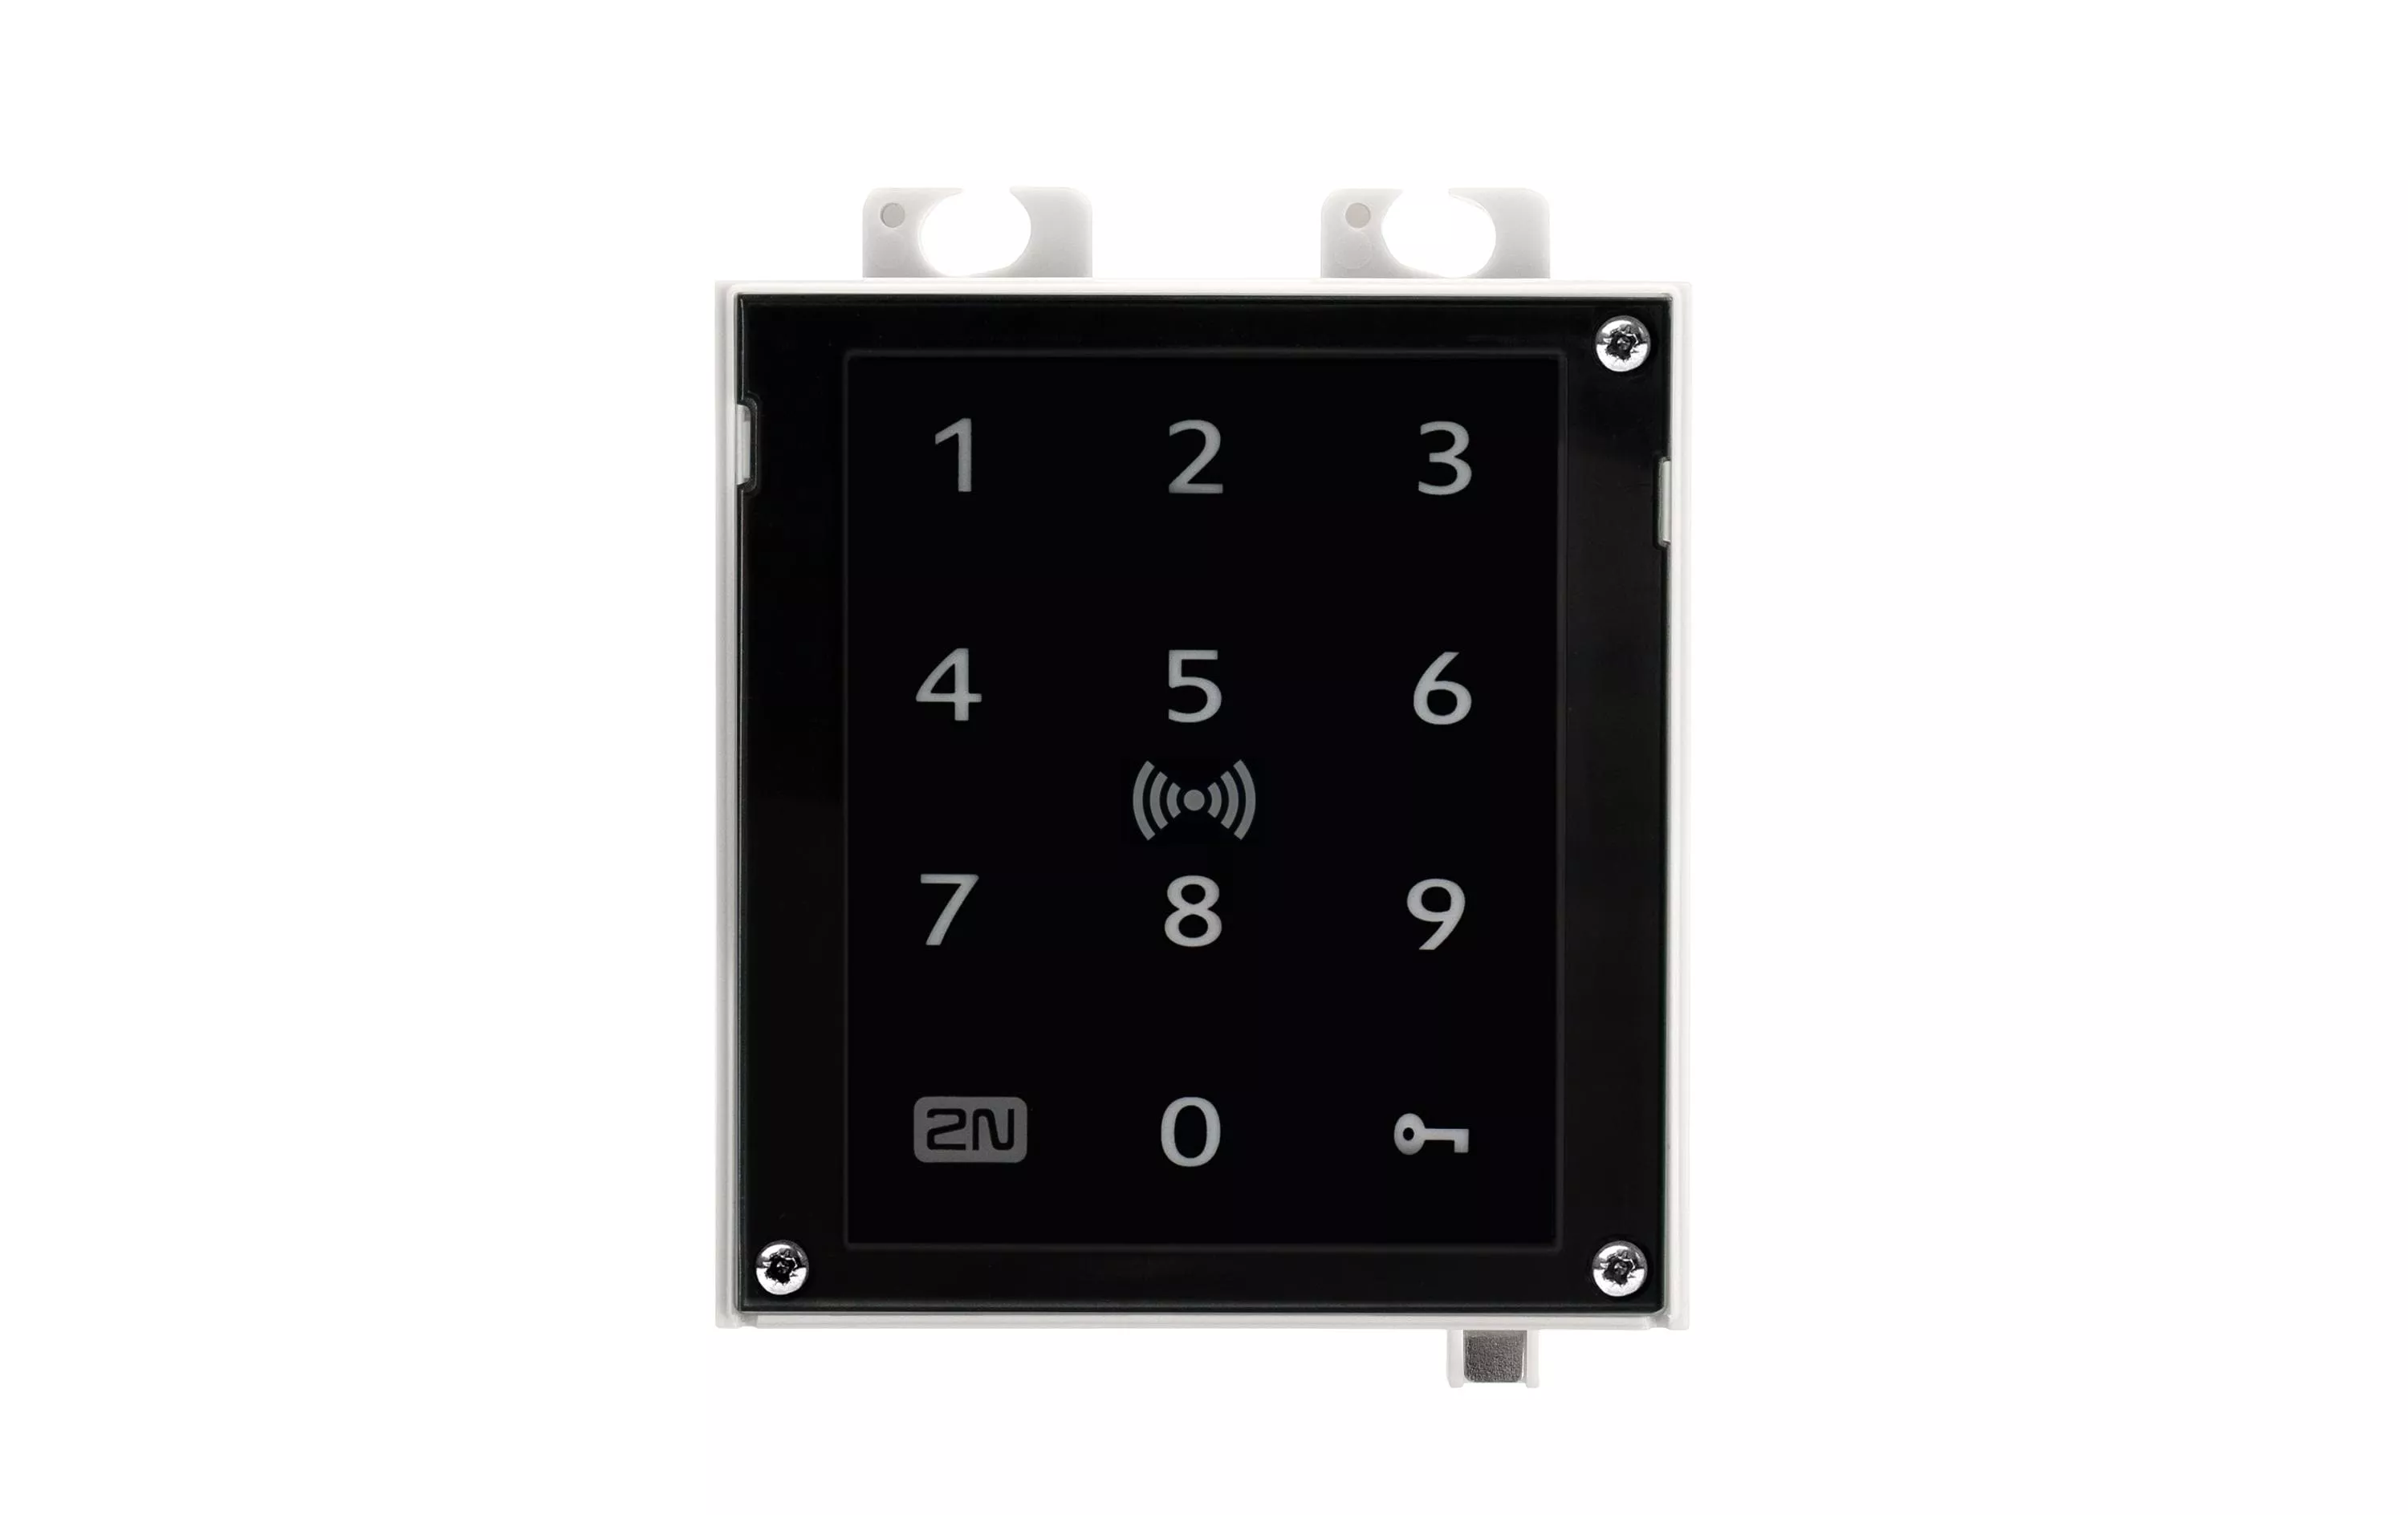 Multireader Access Unit 2.0 Touch Keypad & RFID Secured